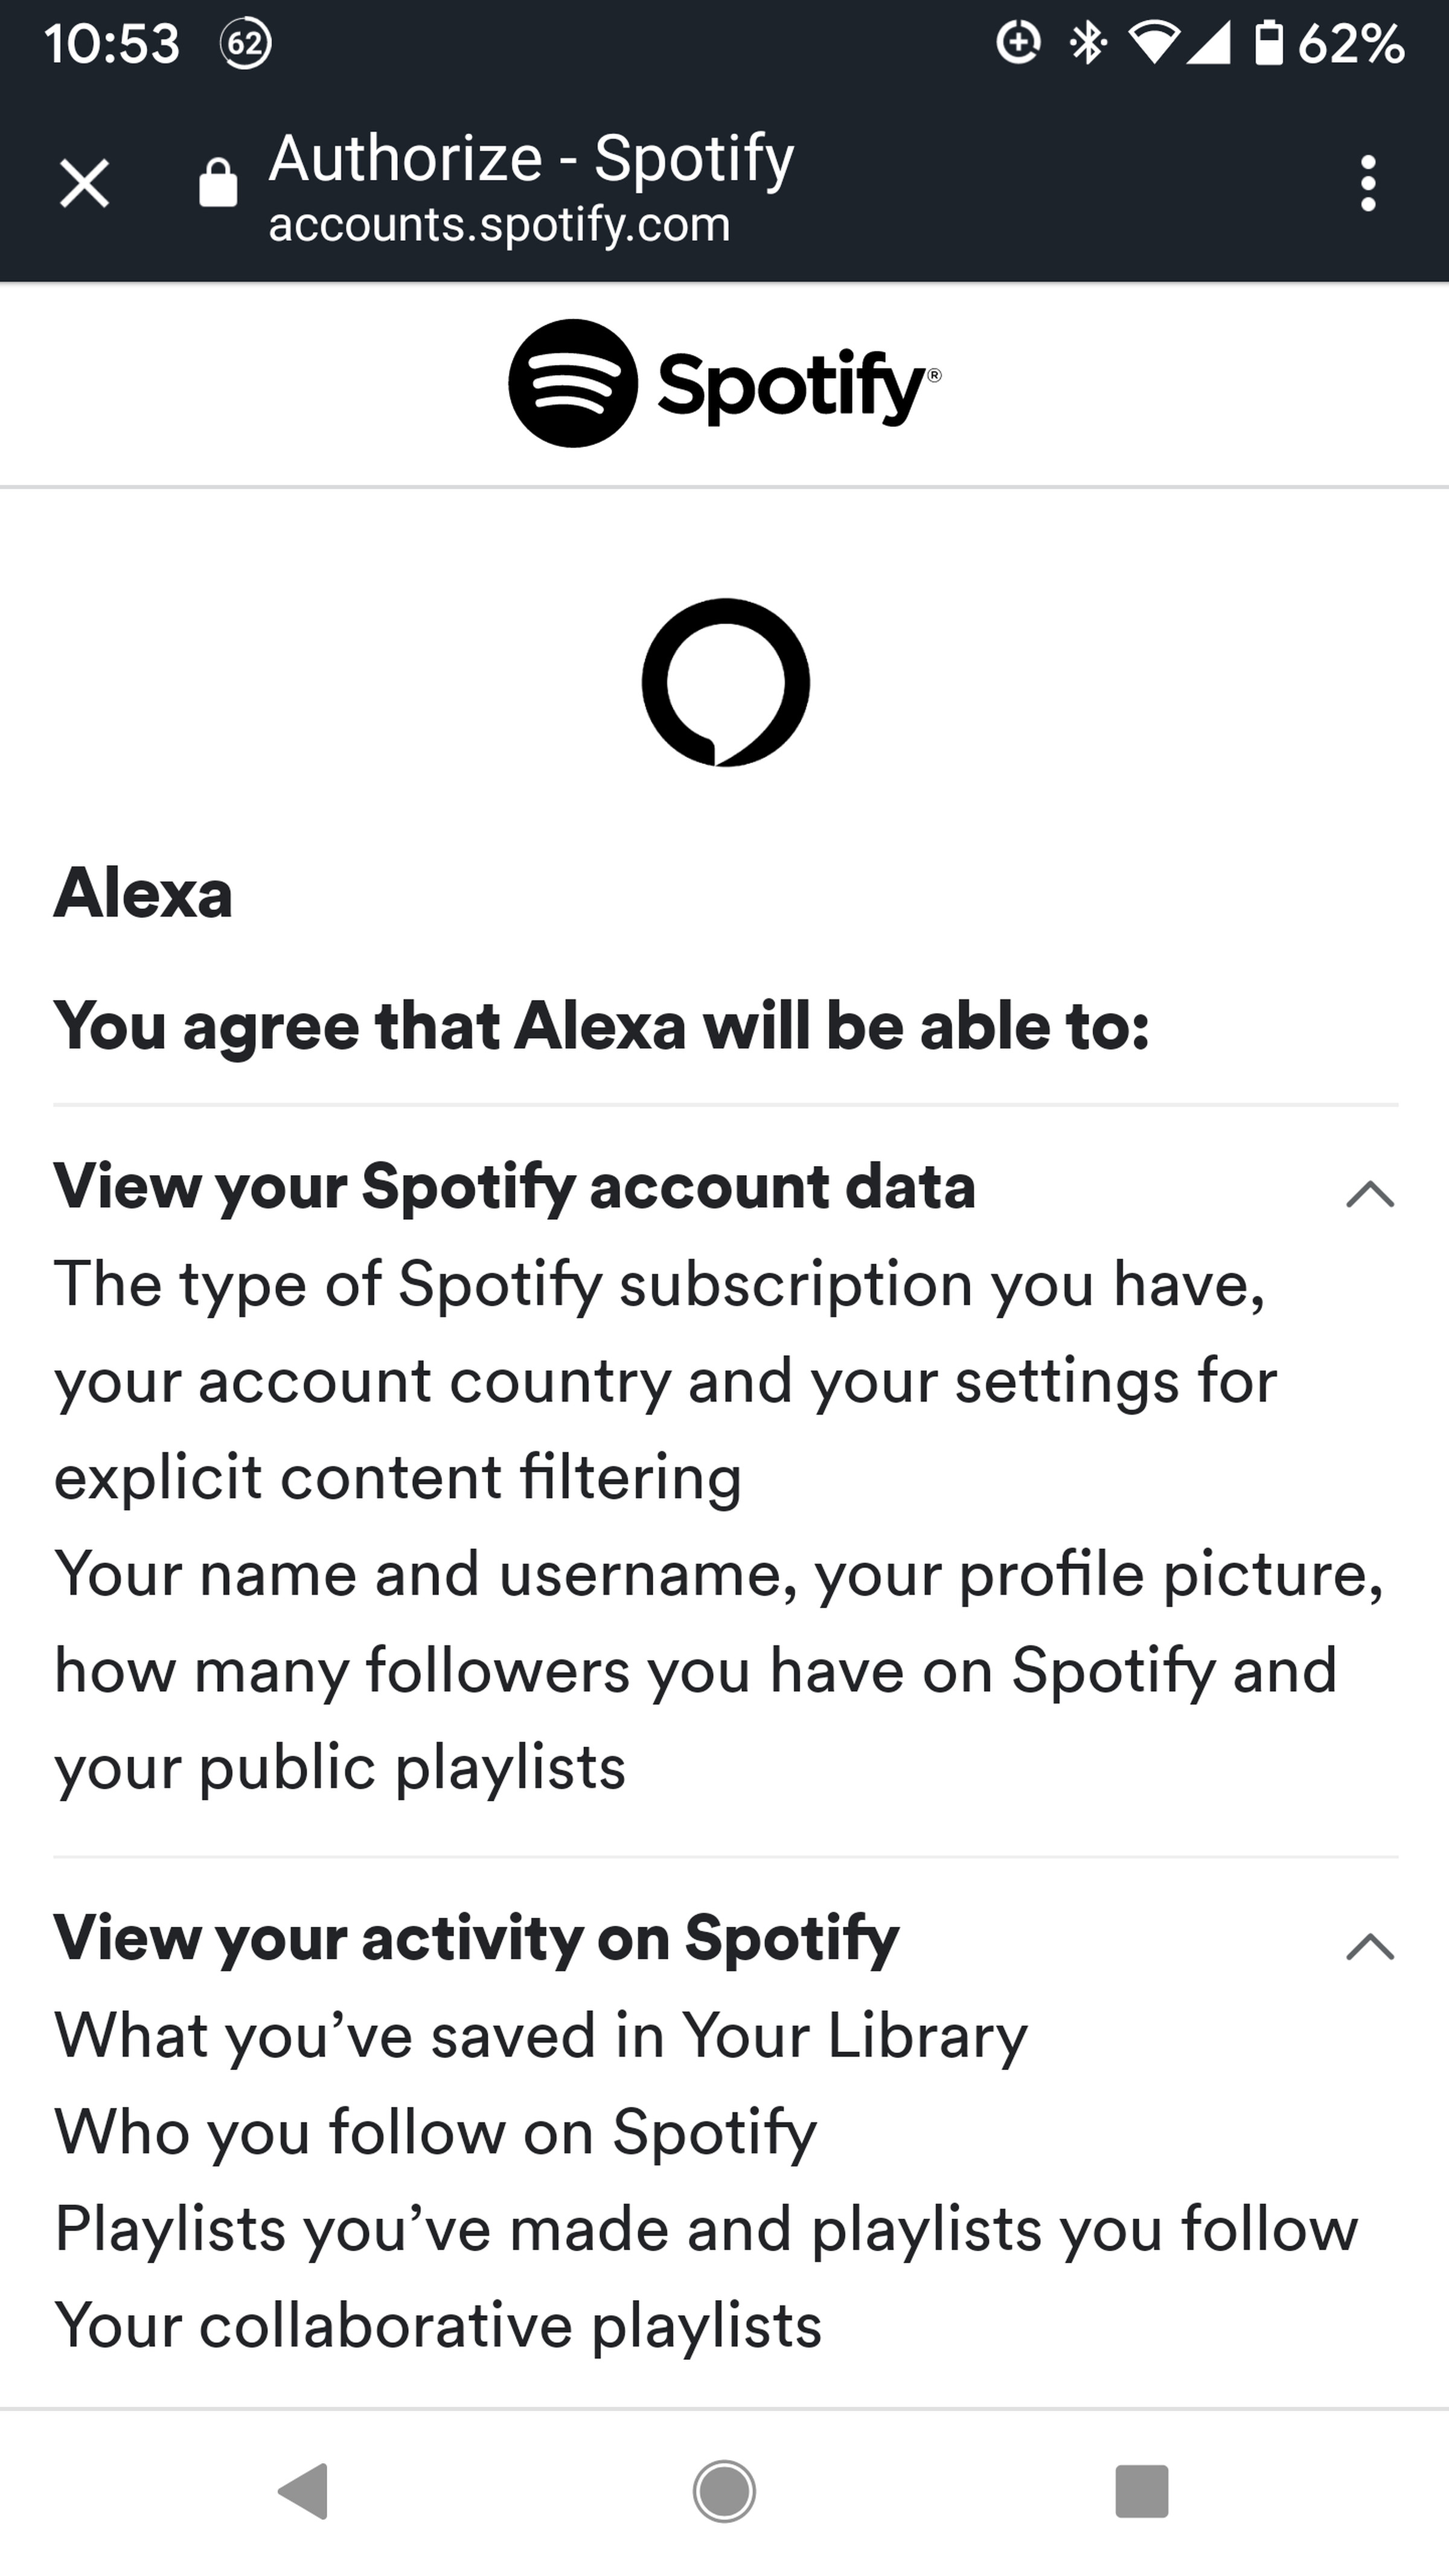 Connecting Alexa to music services